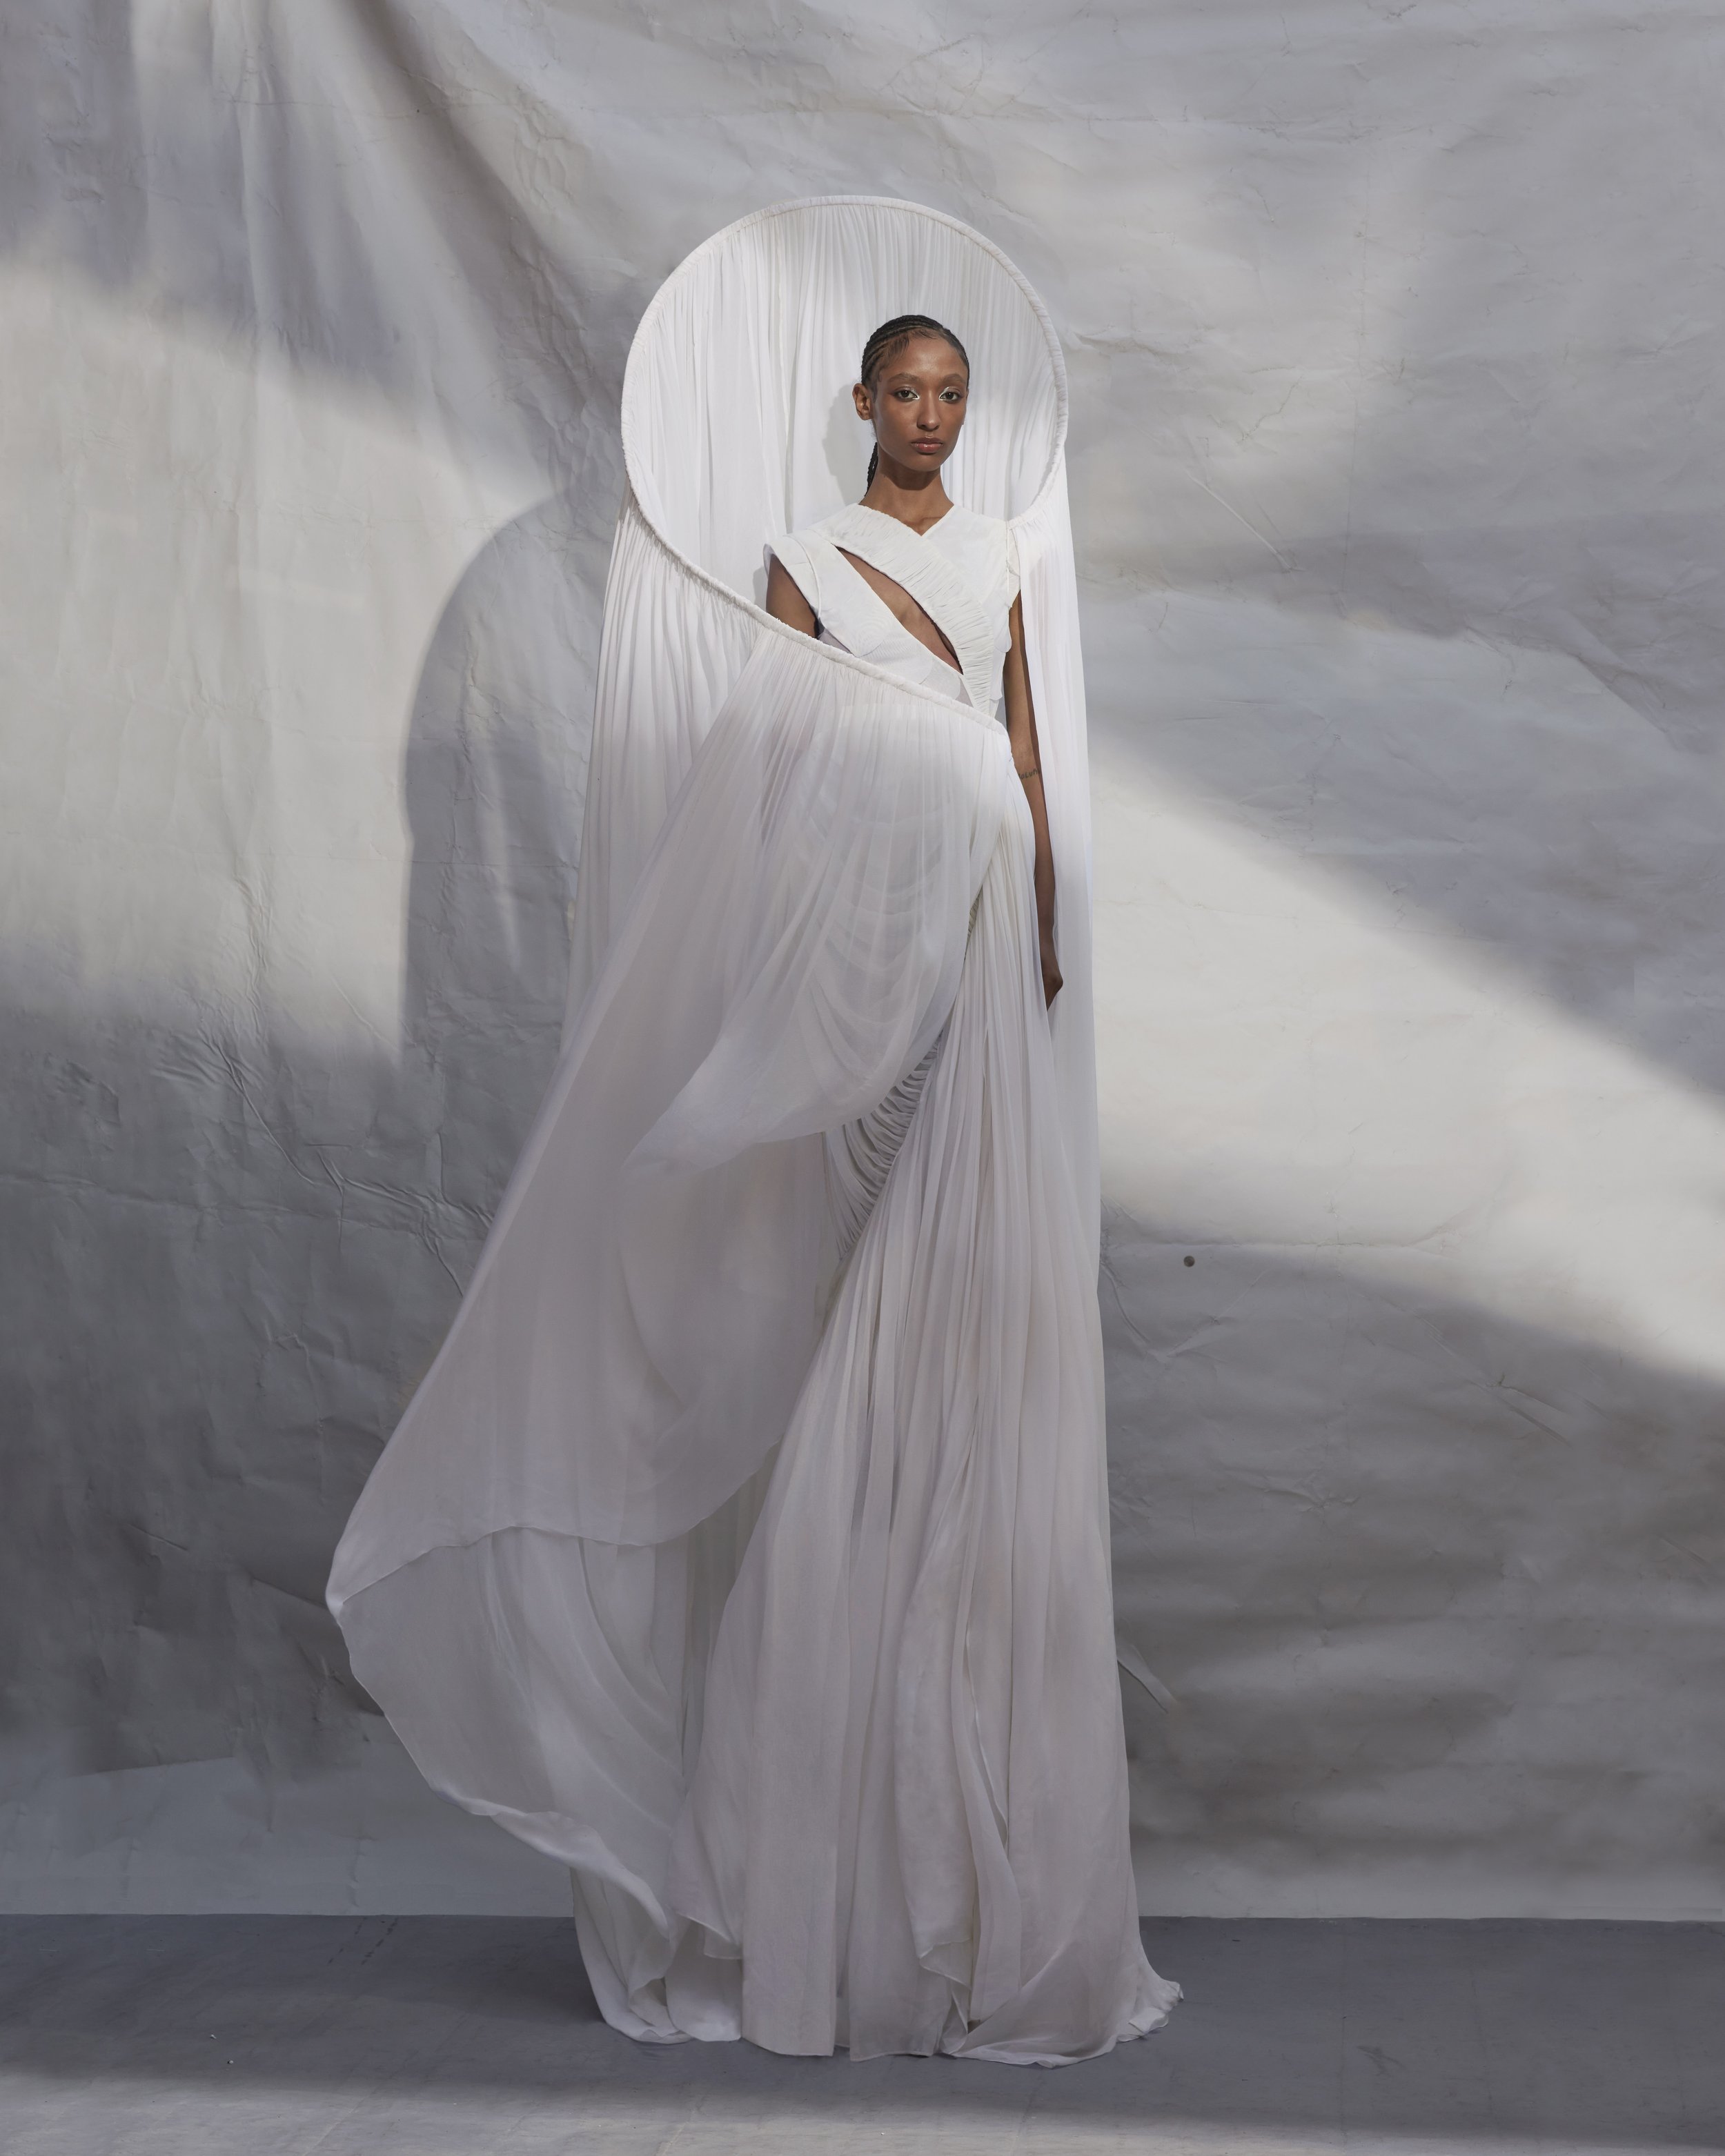 EXCLUSIVE: Johannes Warnke’s new collection is here and it’s giving ...